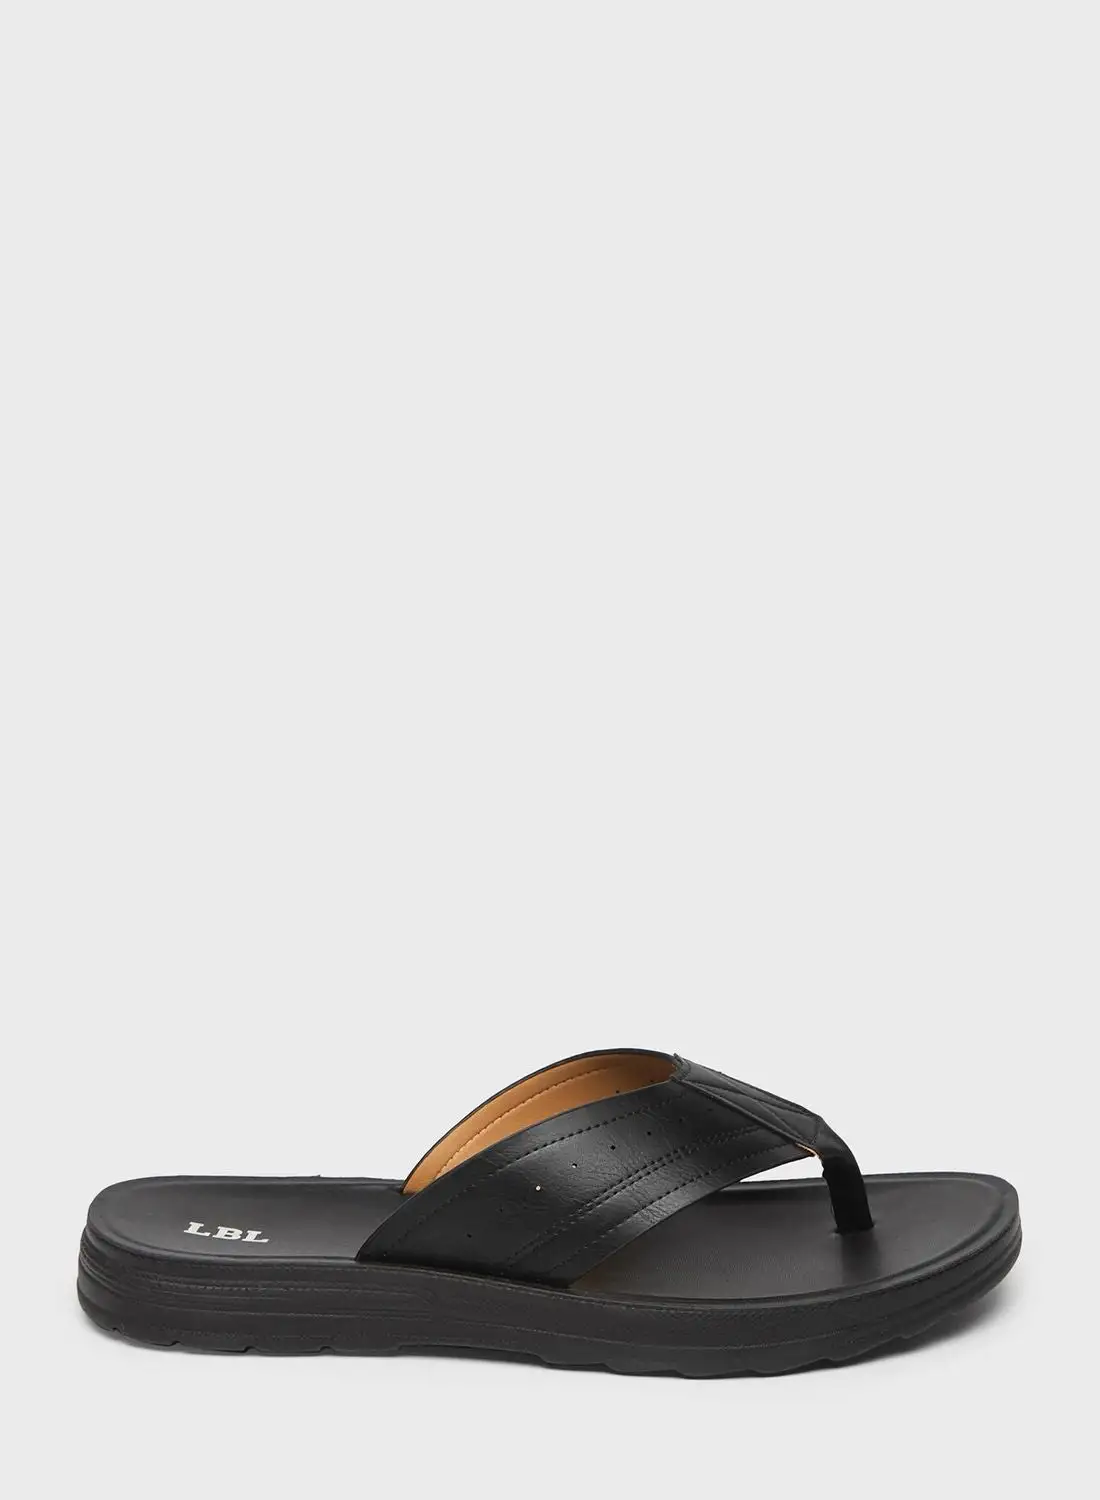 LBL by Shoexpress Casual Comfort Sandals